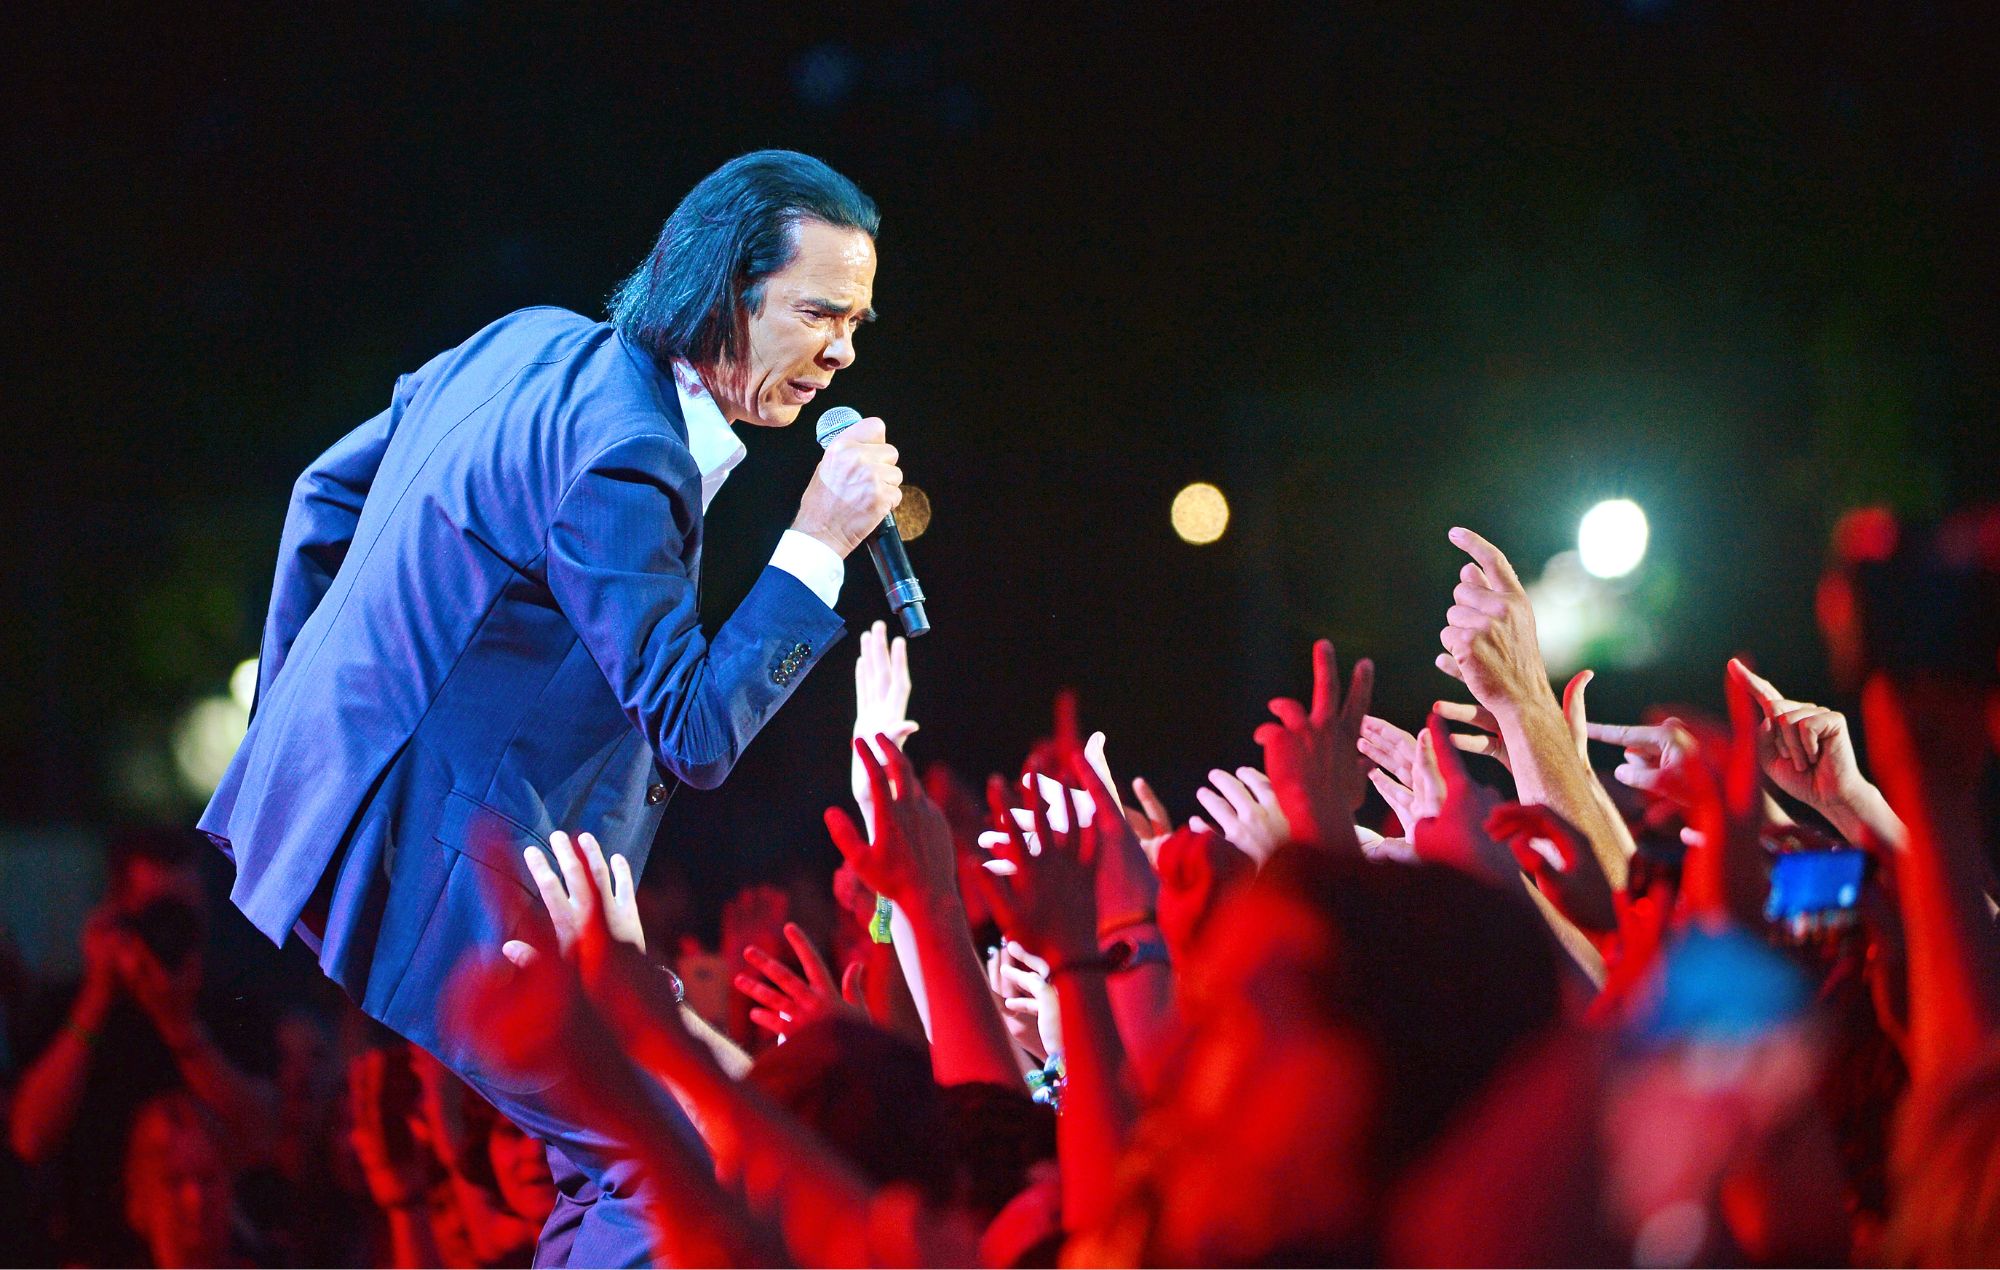 Nick Cave of Nick Cave And The Bad Seeds performs on stage during All Points East at Victoria Park on August 28, 2022 in London, England.